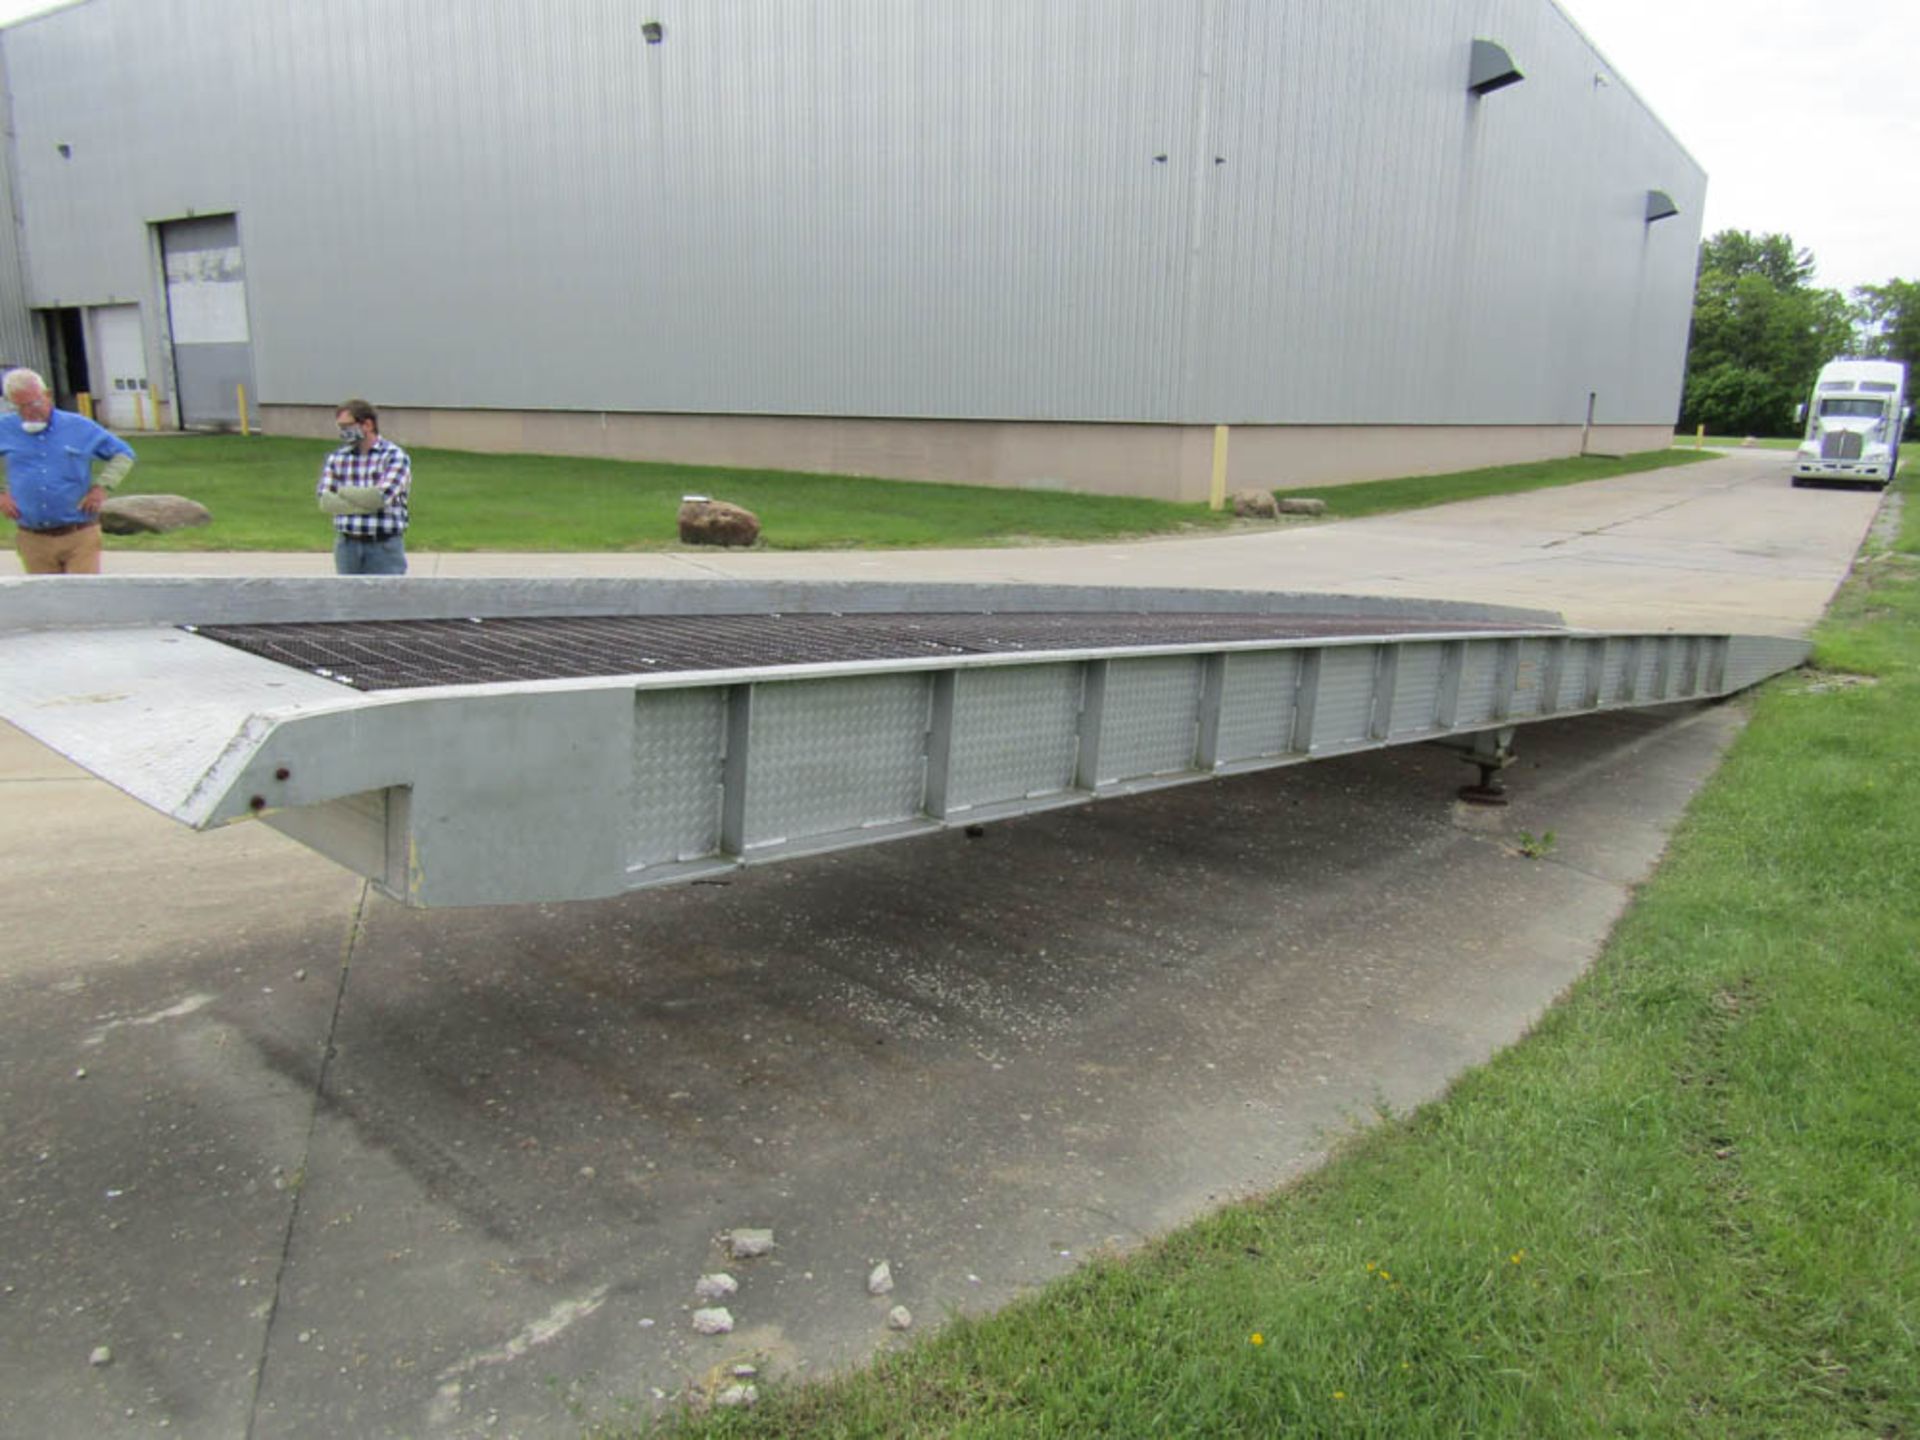 Modern Light Metals Aluminum Loading Ramp, Weight Capacity 25000 lbs, 4448 Weight, S/N 86975, MDL - Image 3 of 3